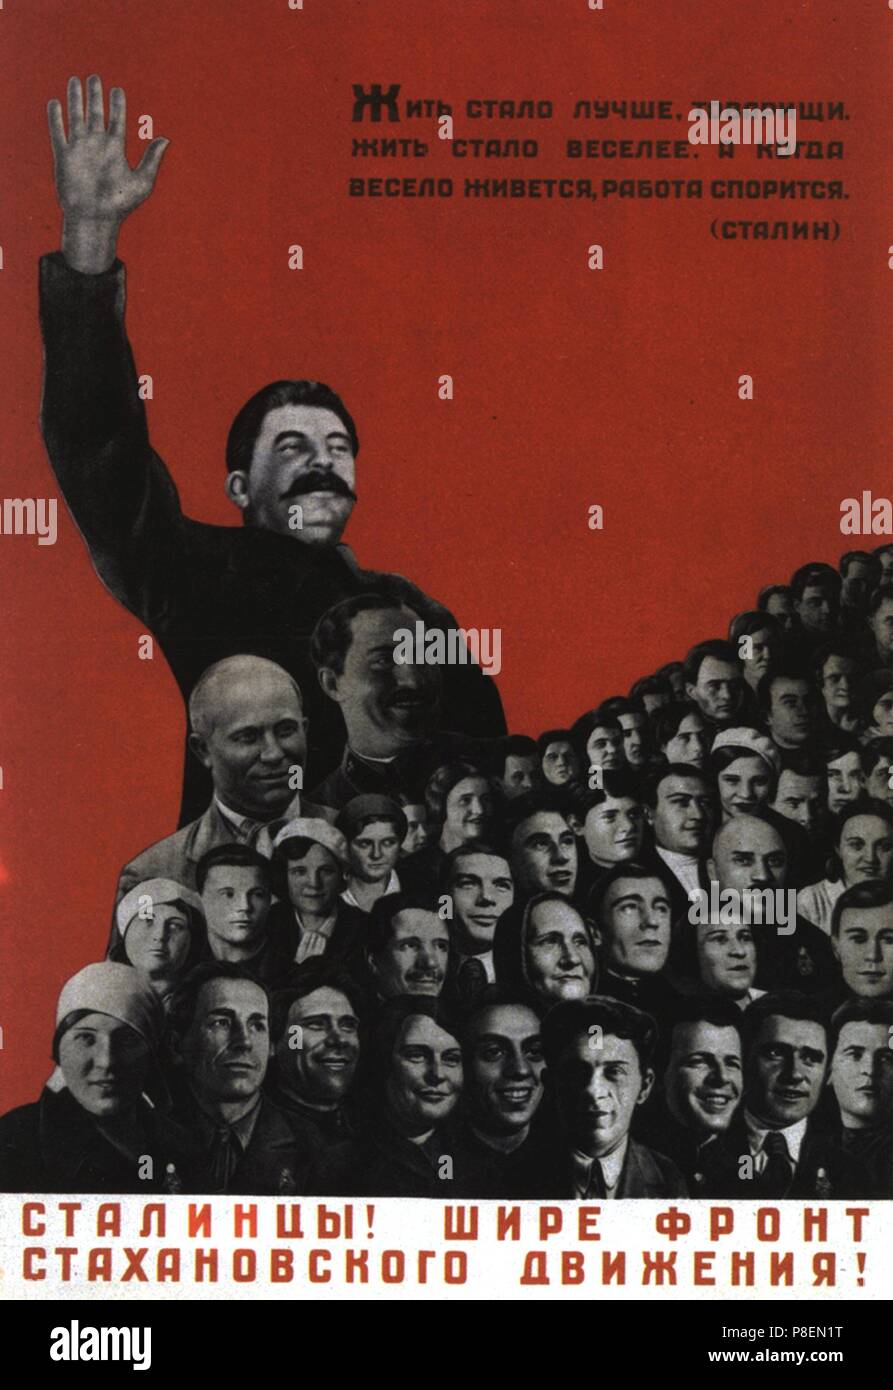 Stalintsy! Let's make the front of Stahanov movement wider!. Museum: State History Museum, Moscow. Stock Photo